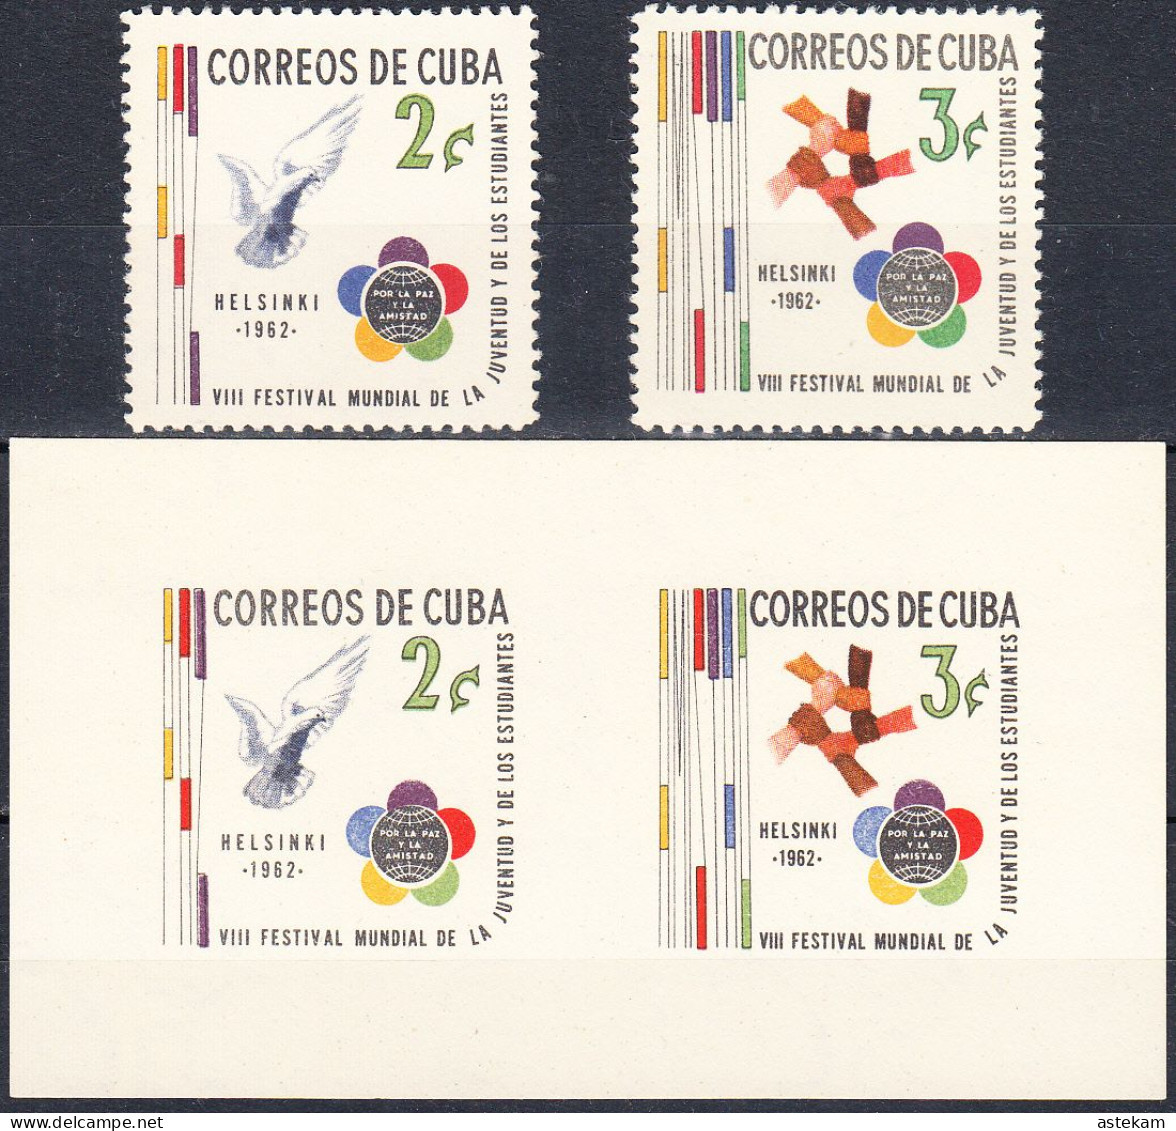 CUBA 1962, 8th WORLD FESTIVAL Of YOUTH And STUDENTS In HELSINKI, COMPLETE MNH SERIES+BLOCK With GOOD QUALITY,*** - Ungebraucht